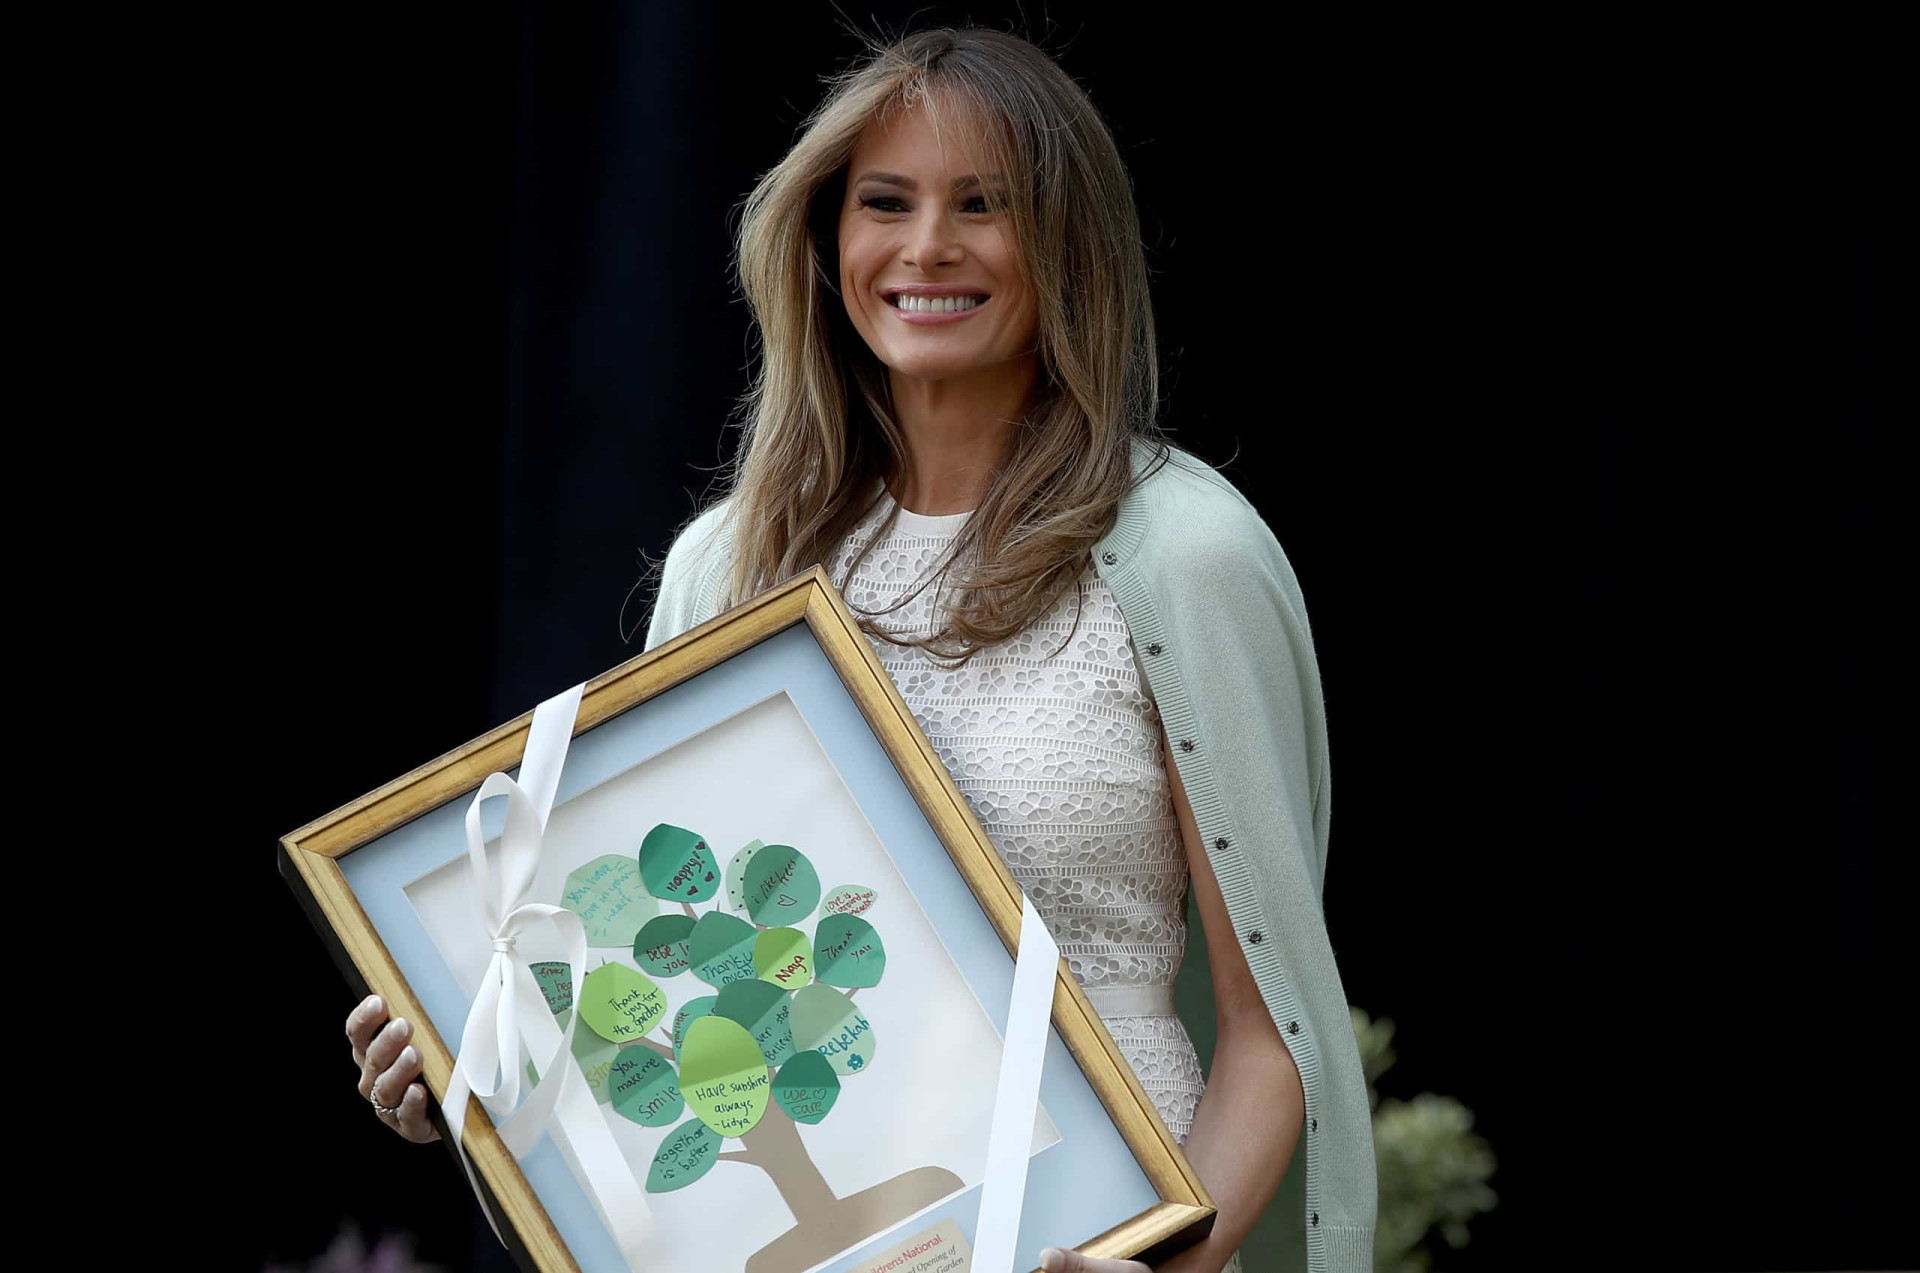 <p>Though the First Lady might have to declare them in the annual disclosure report and pay taxes. As for food, drinks, combustible items, and creams or lotions applied to the skin, they're destroyed by the Secret Service, for security reasons.</p><p><a href="https://www.msn.com/en-us/community/channel/vid-7xx8mnucu55yw63we9va2gwr7uihbxwc68fxqp25x6tg4ftibpra?cvid=94631541bc0f4f89bfd59158d696ad7e">Follow us and access great exclusive content every day</a></p>